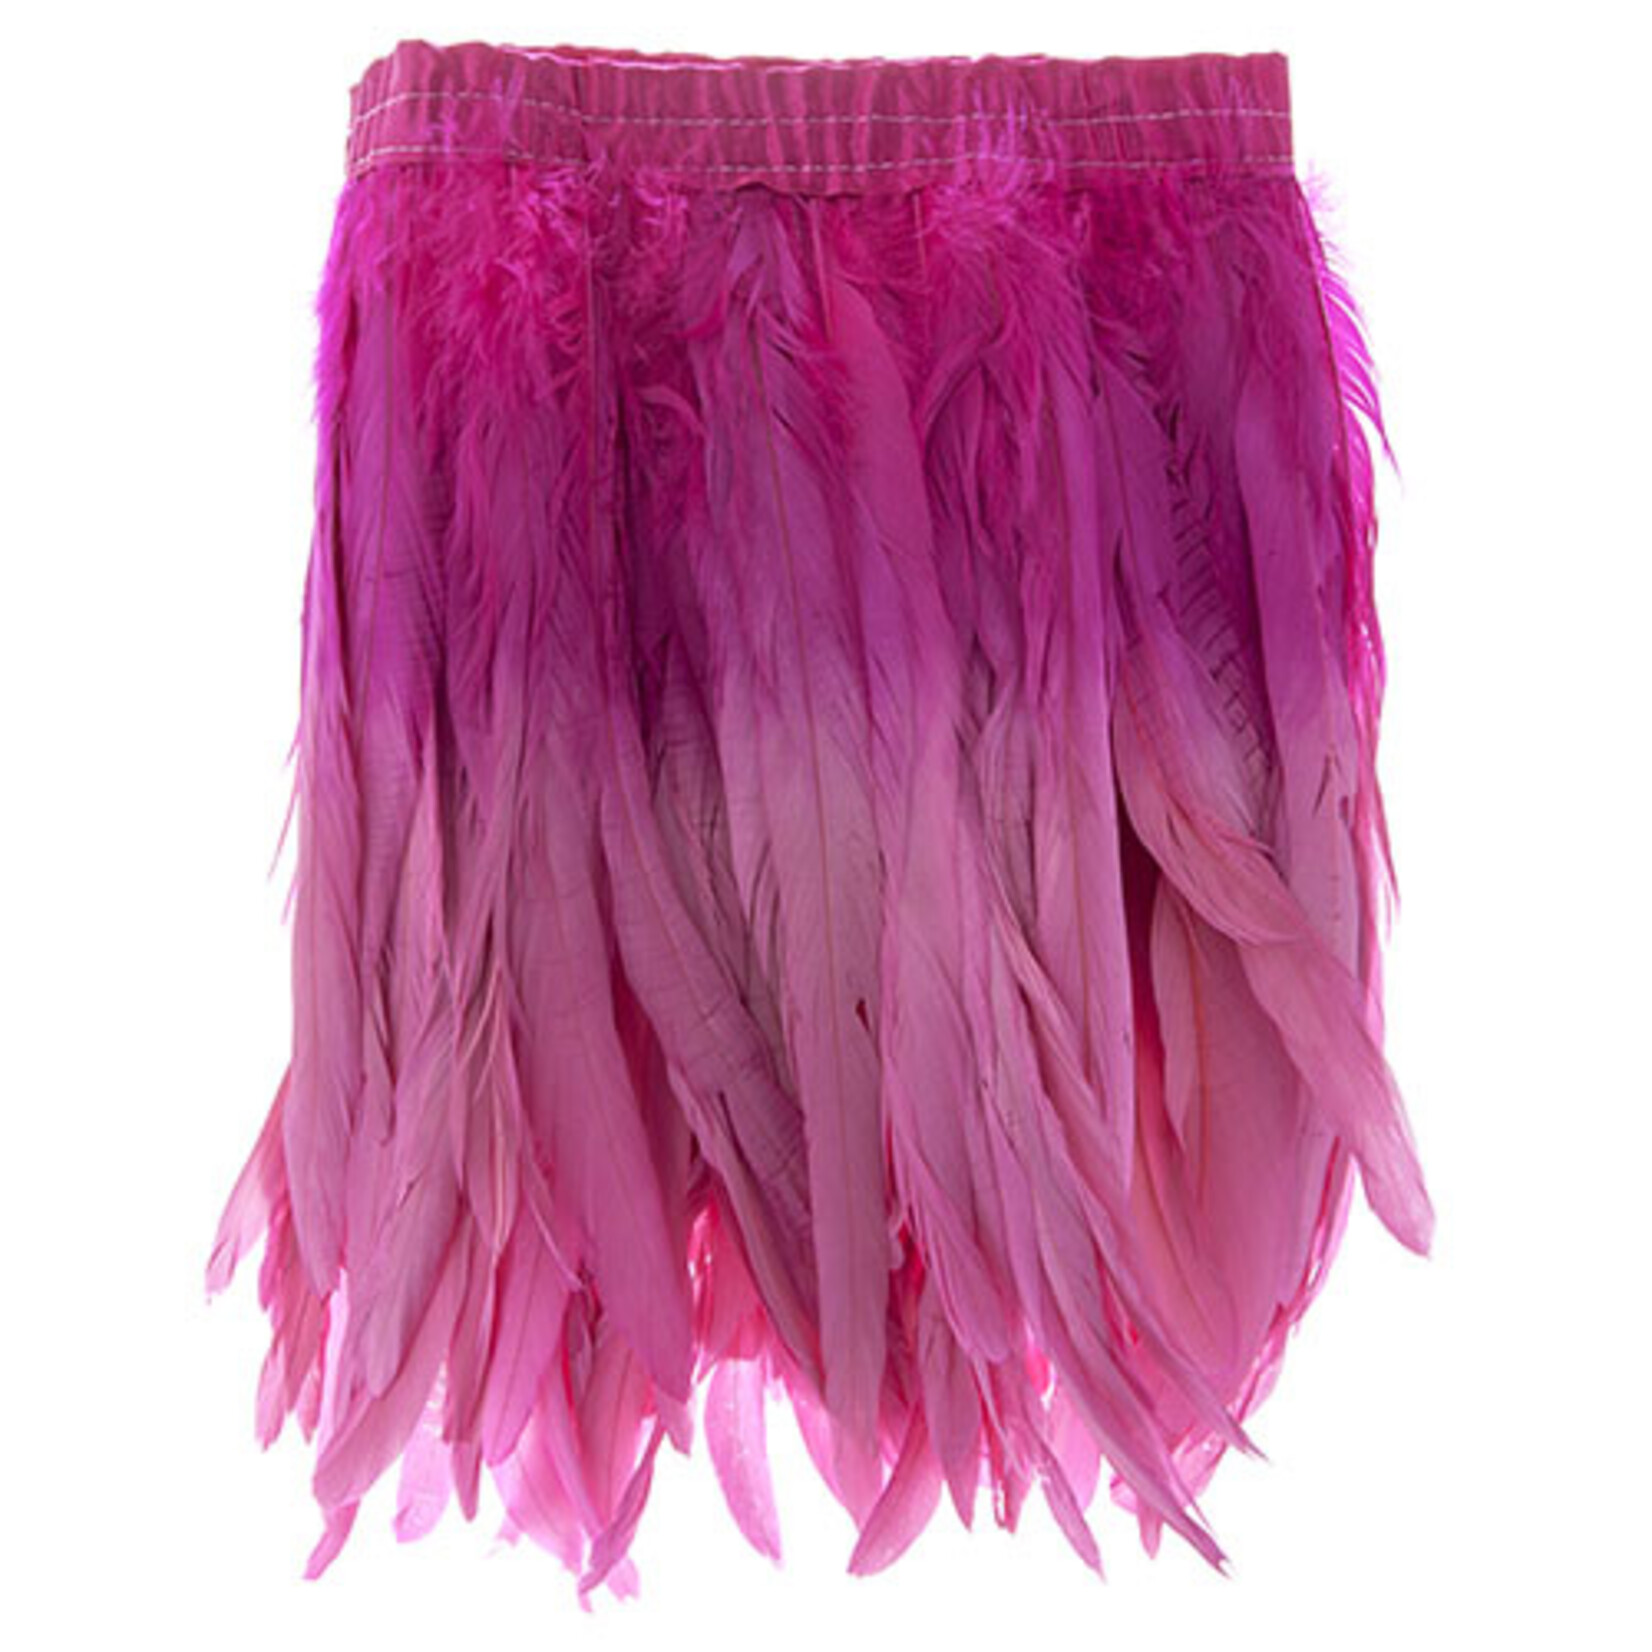 Coque Feathers Value 2 Tone 12 - 14 Inches Pretty In Pink